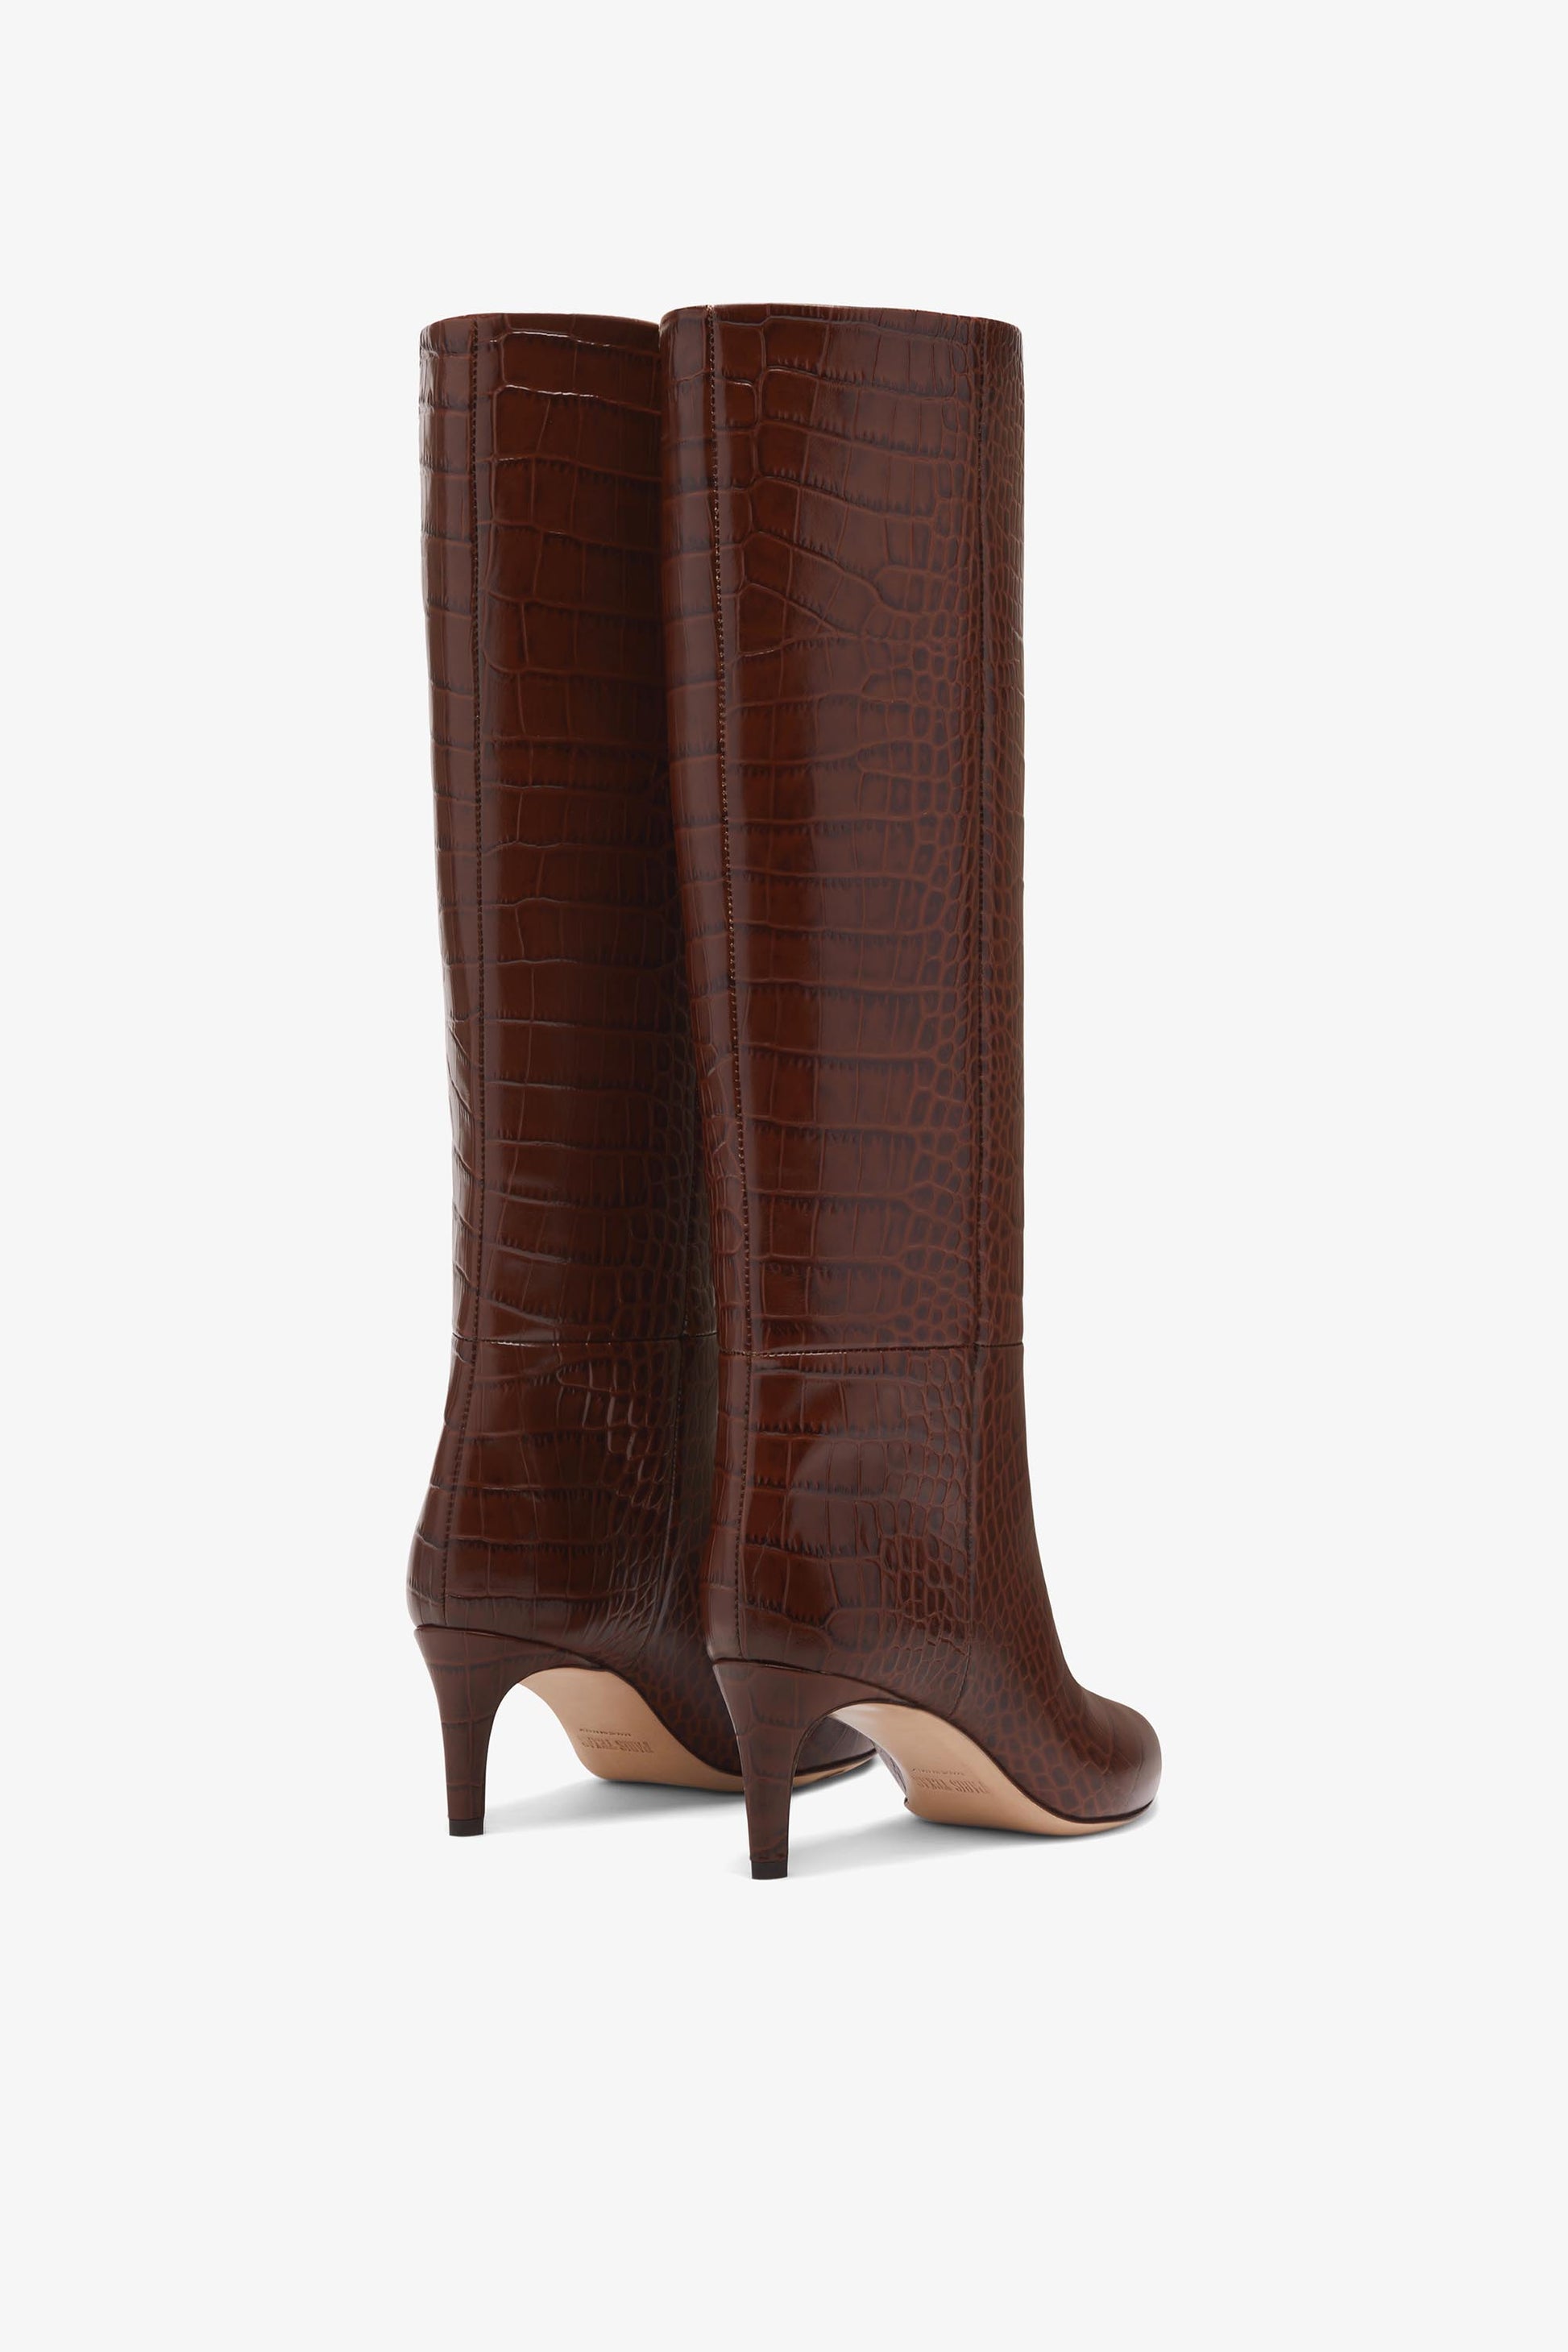 Chocolate brown croc-effect leather heel 60 boots